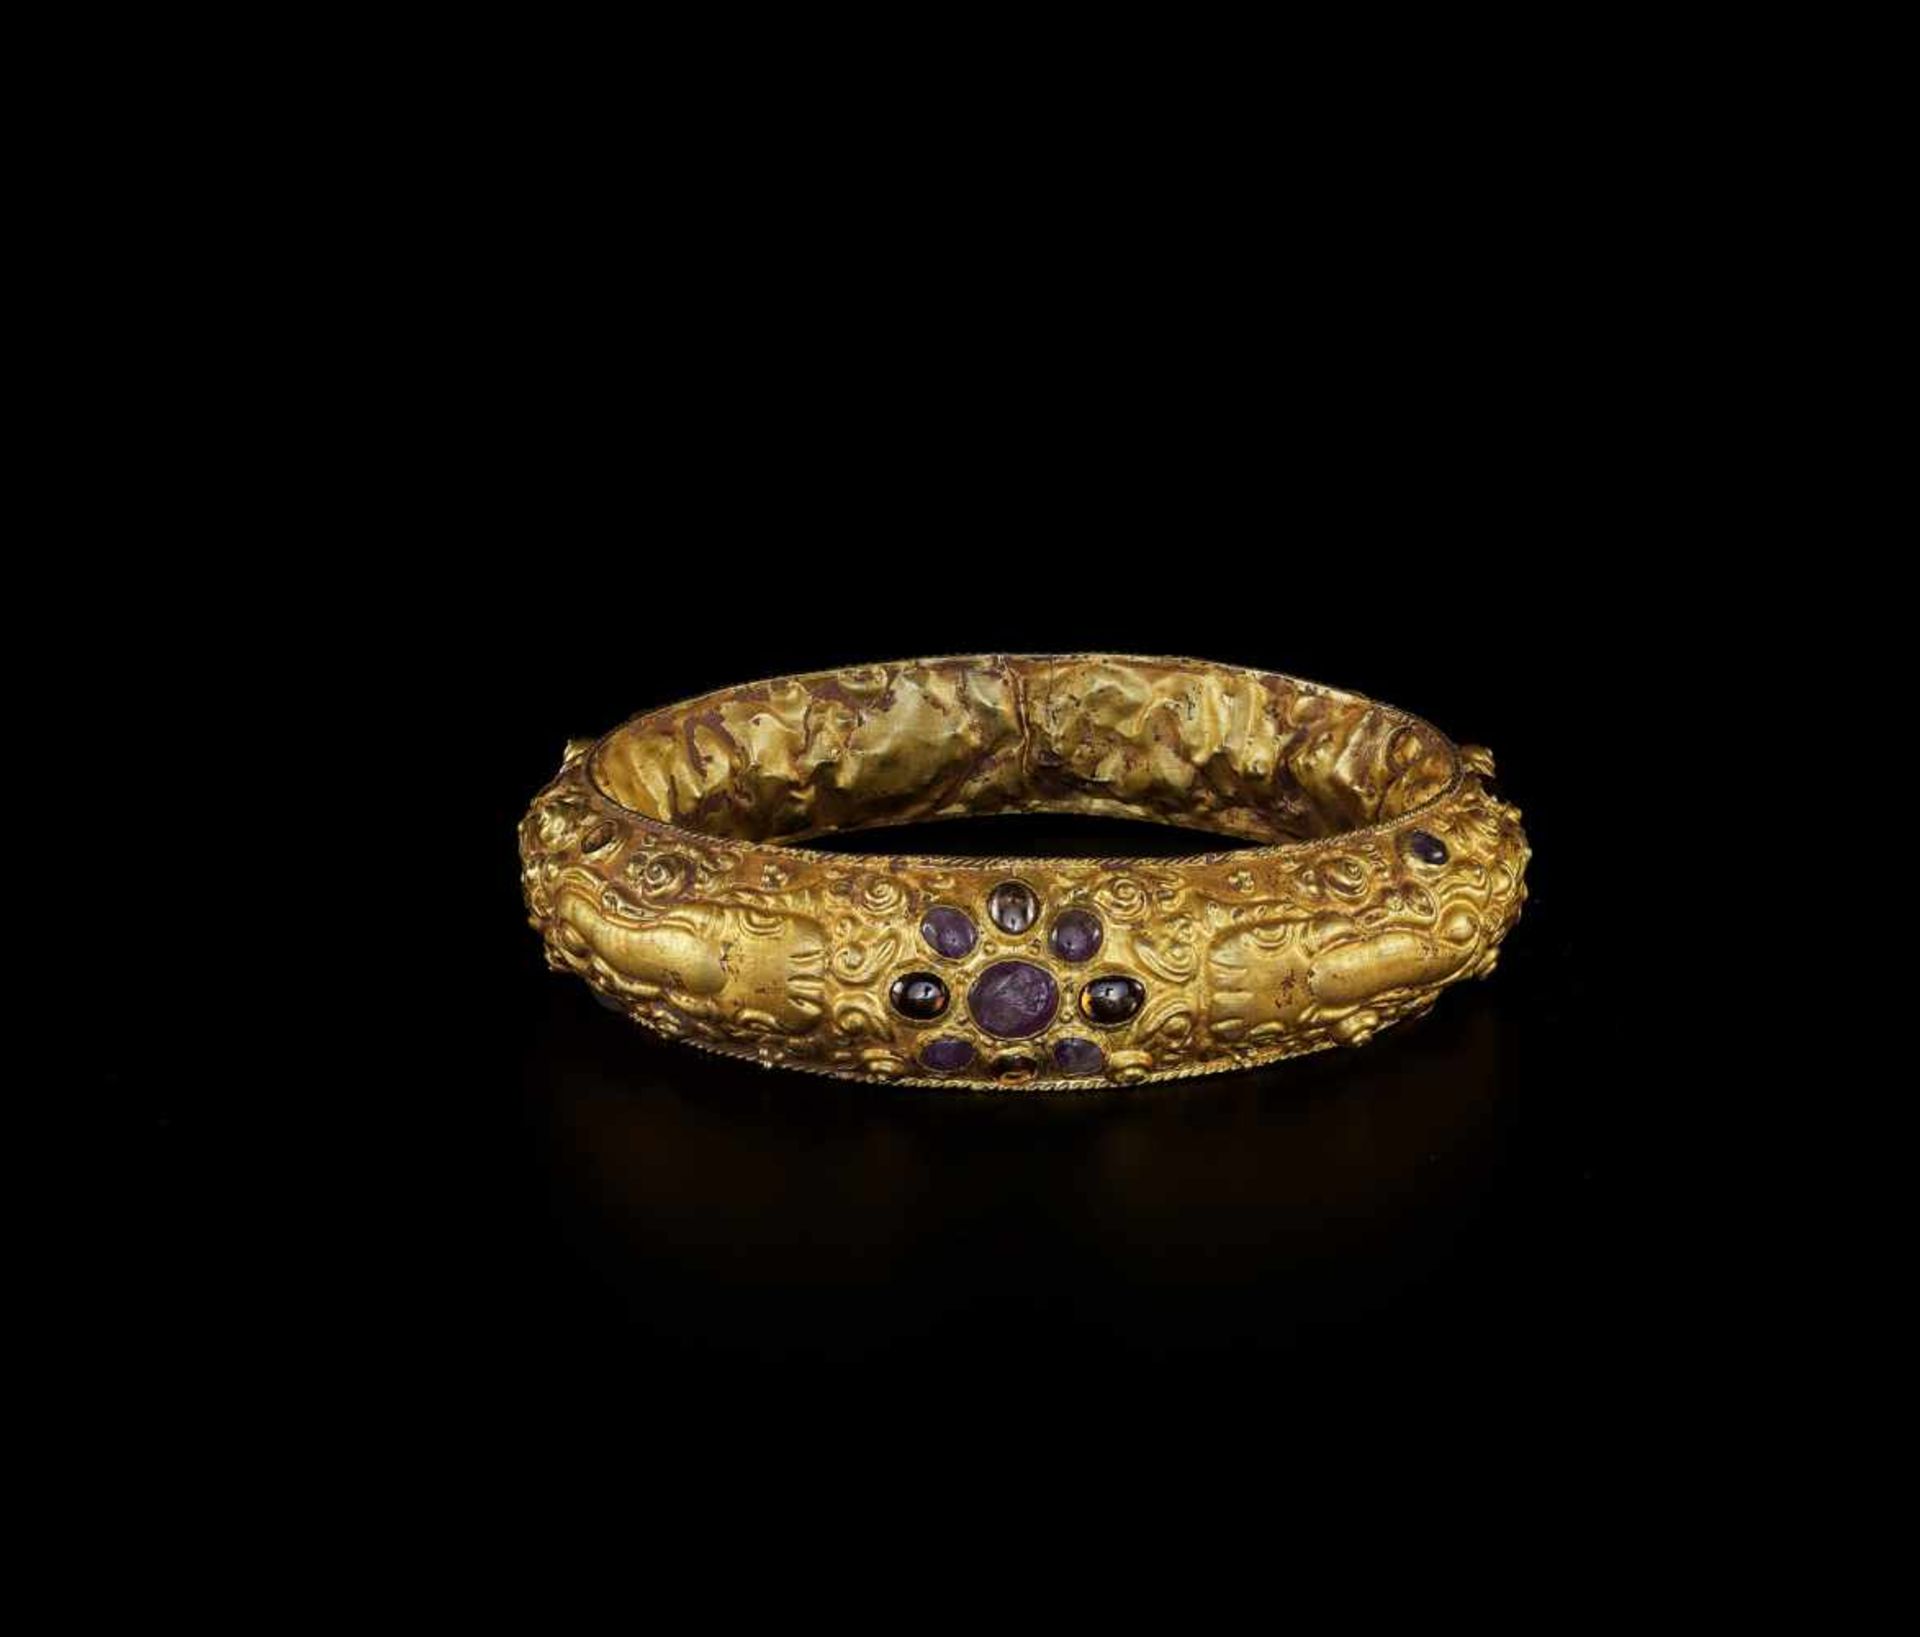 A CHAM REPOUSSÉ GOLD BRACELET WITH A GEMSTONE FLOWER AND ELEPHANTS Champa, classical period,